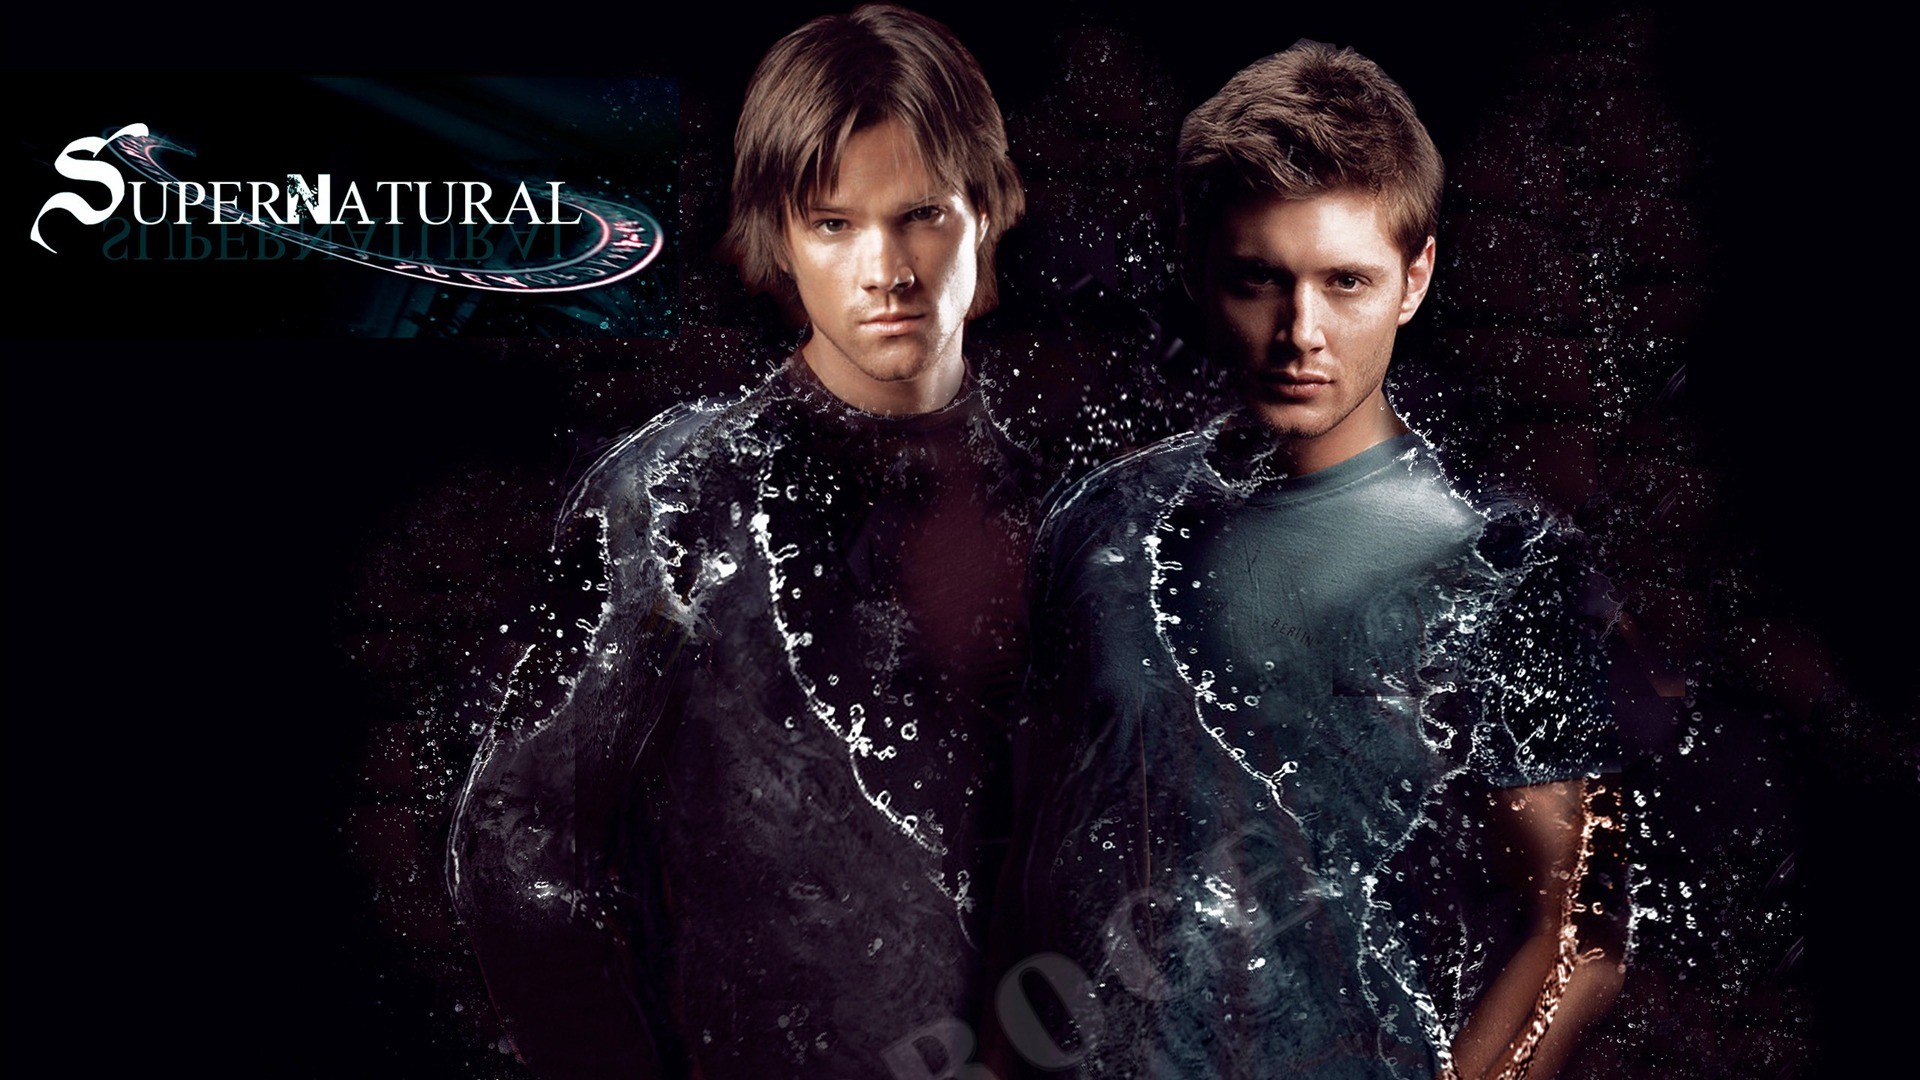 1920x1080 Dean Winchester and Sam Winchester-Supernatural-HD Image -   wallpaper download